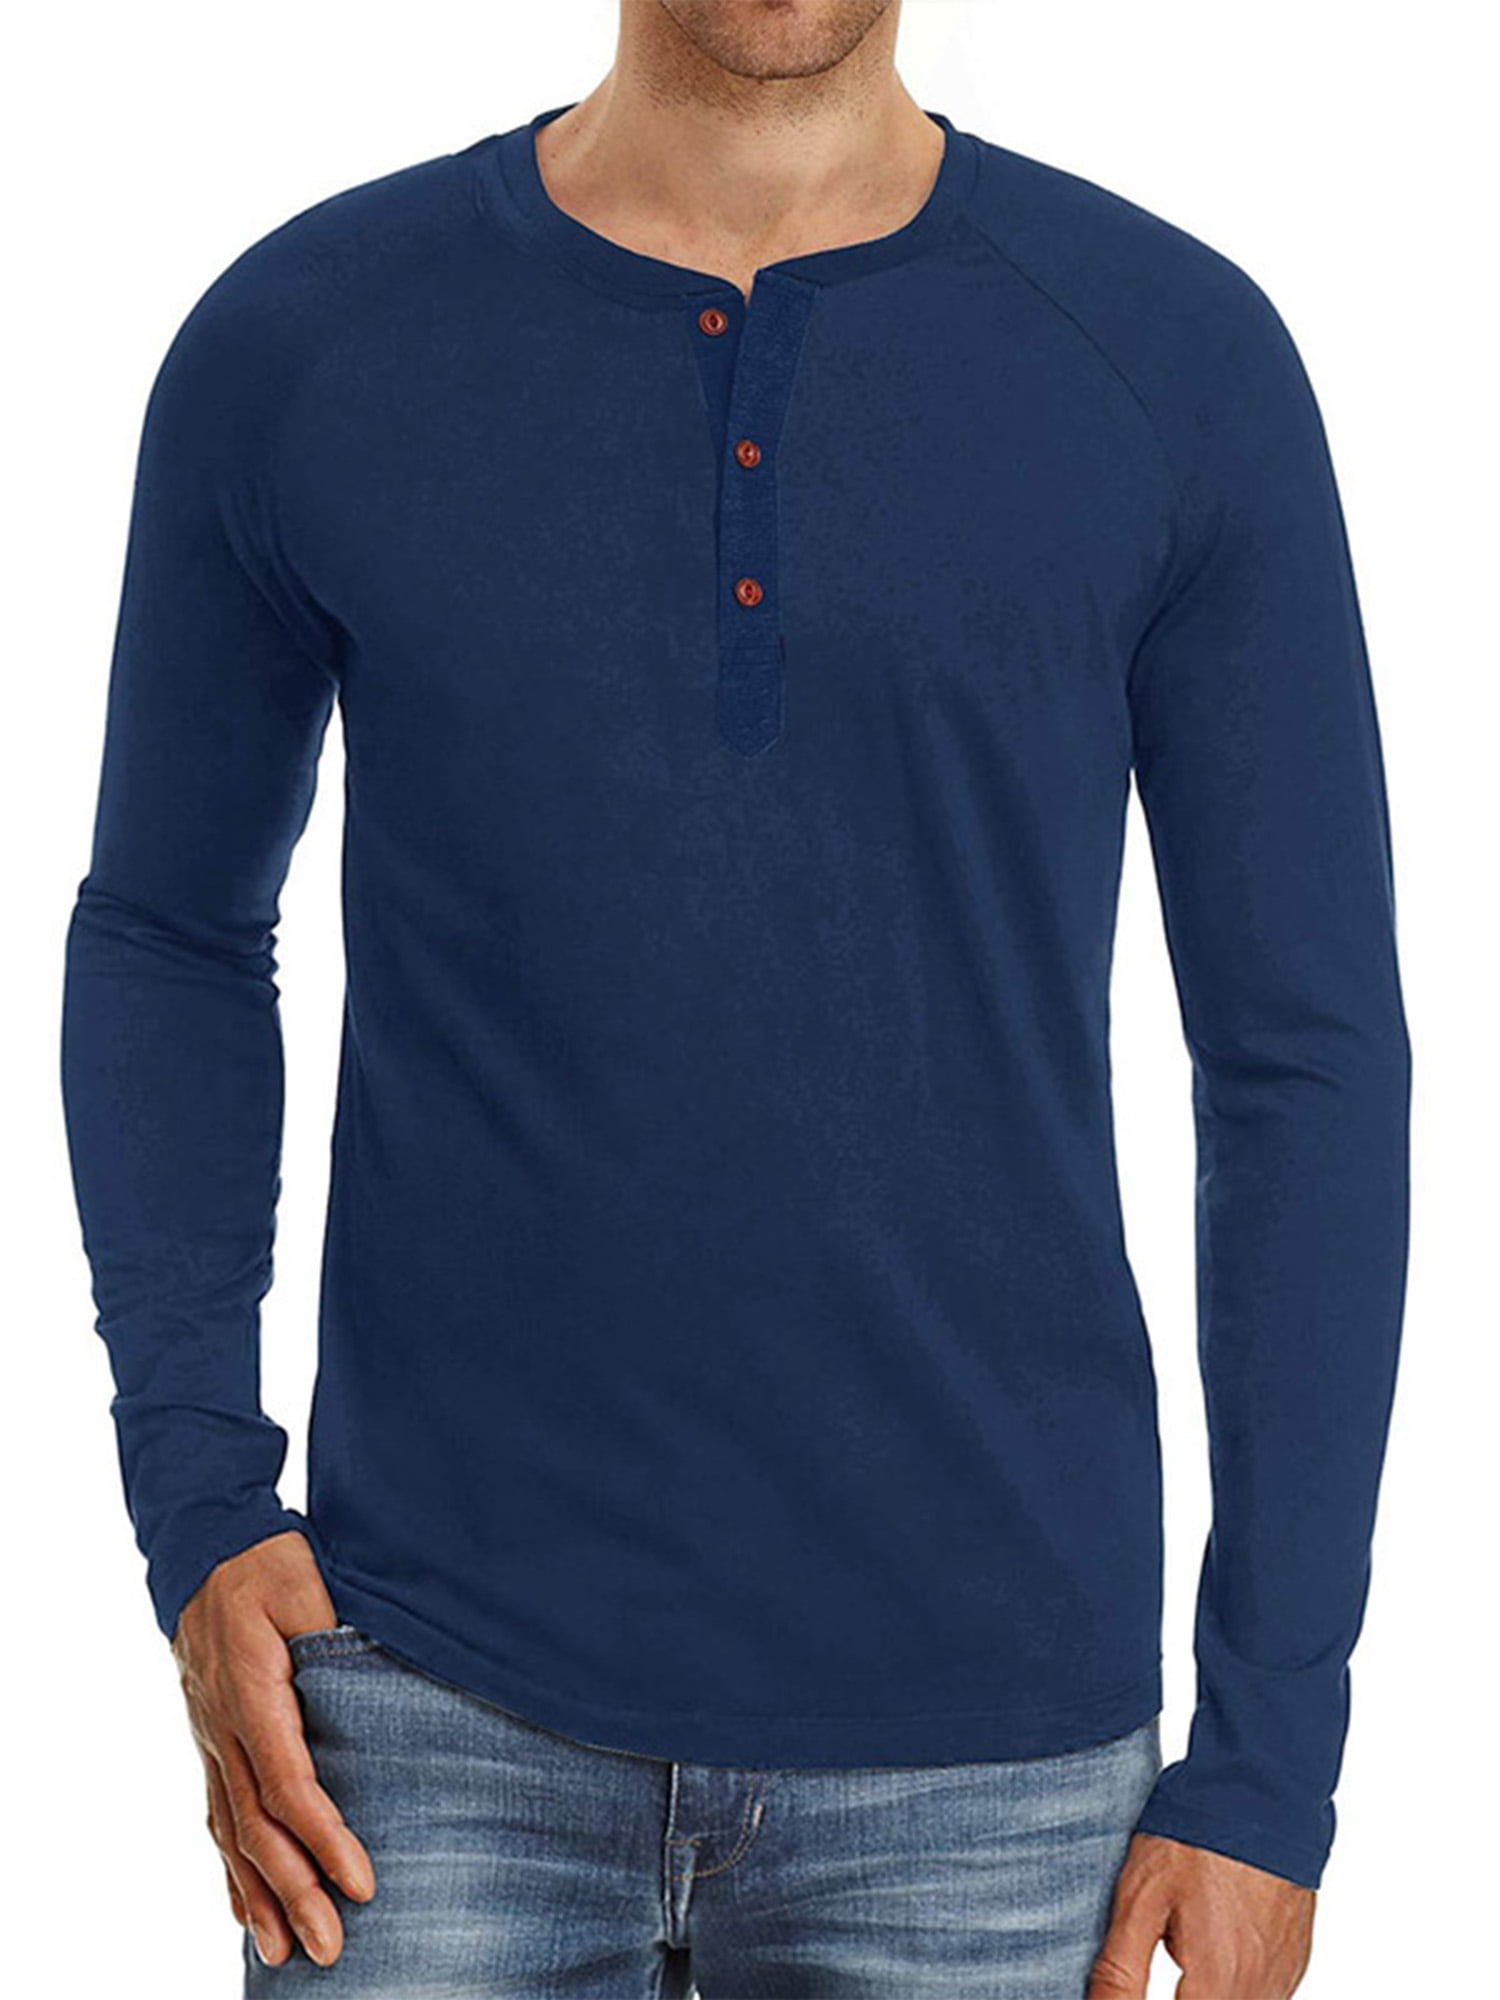 Men V Neck Henley Tops Long Sleeve Sweater T Shirts Solid Tops Casual Undershirt